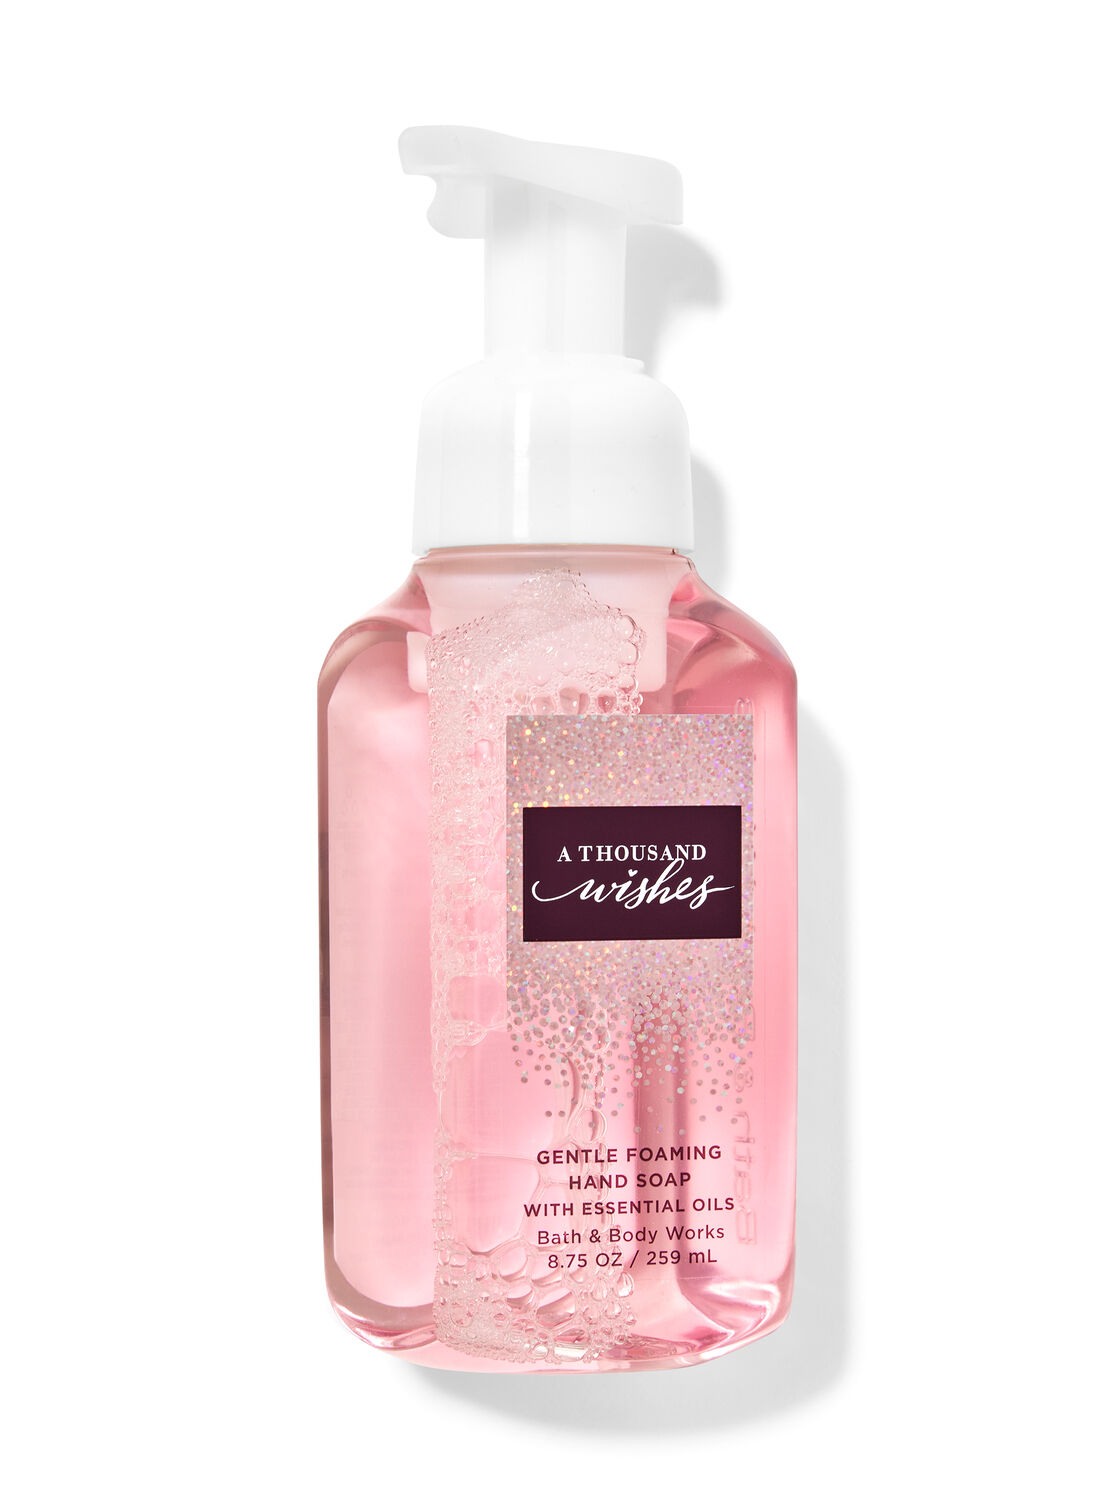 A Thousand Wishes Gentle Foaming Hand Soap